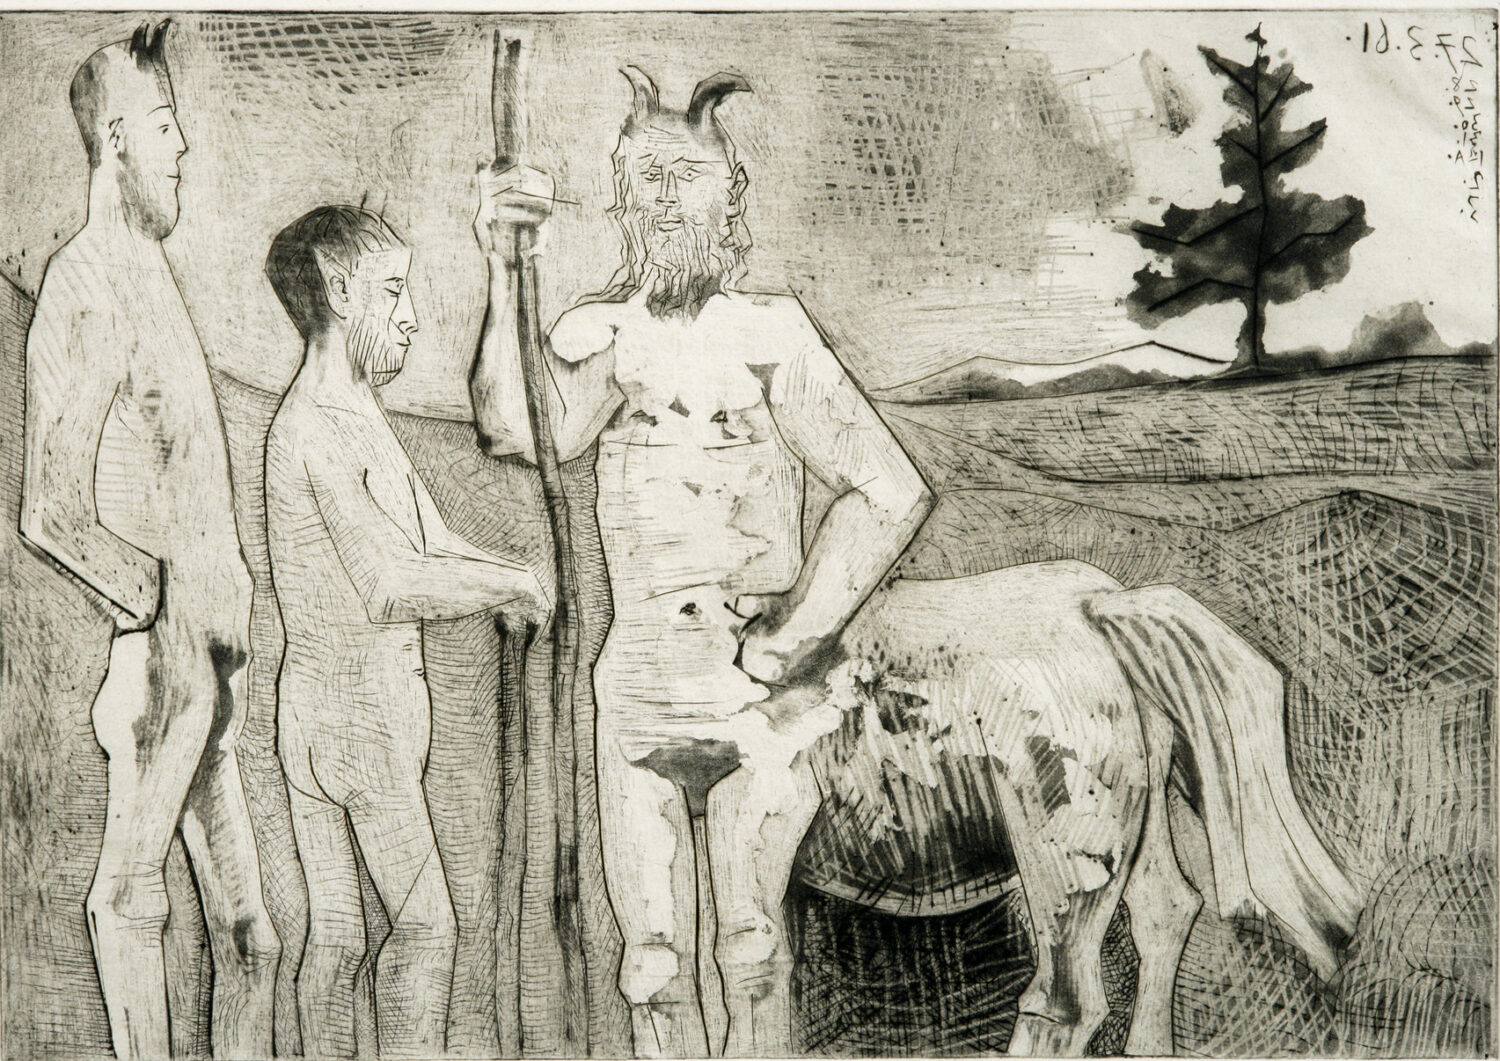 thumbnail of Etching, Engraving, Burin and Sugar-Lift Aquatint by Pablo Picasso titled Rencontre: Faune, Centaure et Homme Aux Oreilles.